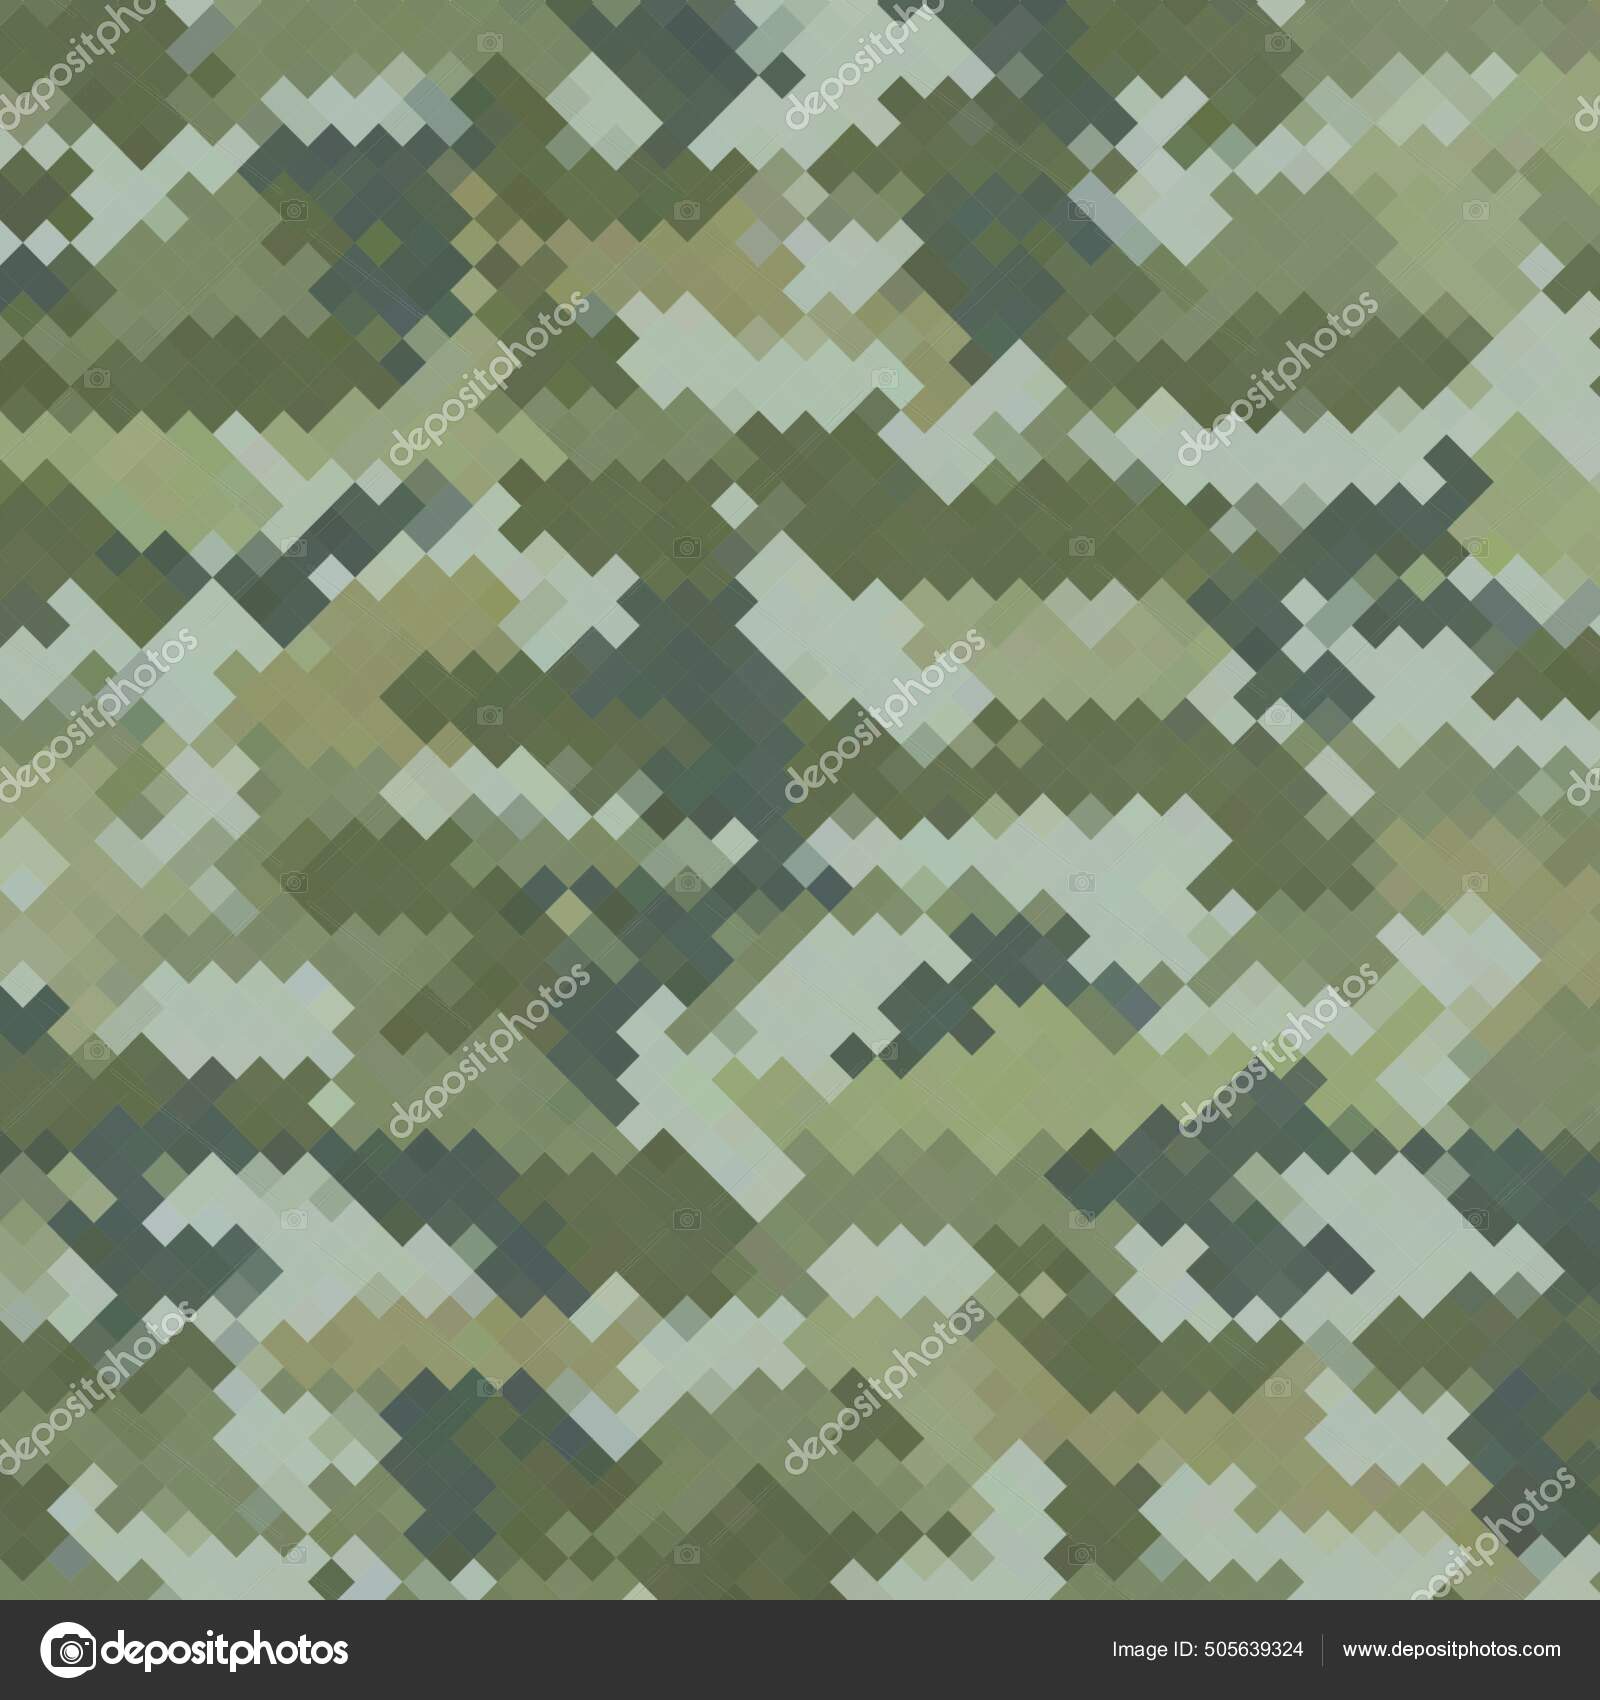 Brown green and black Pixel Camouflage Khaki Digital Camo background  military pattern army and sport clothing urban fashion Vector Format  219 aspect ratio Stock Vector  Adobe Stock